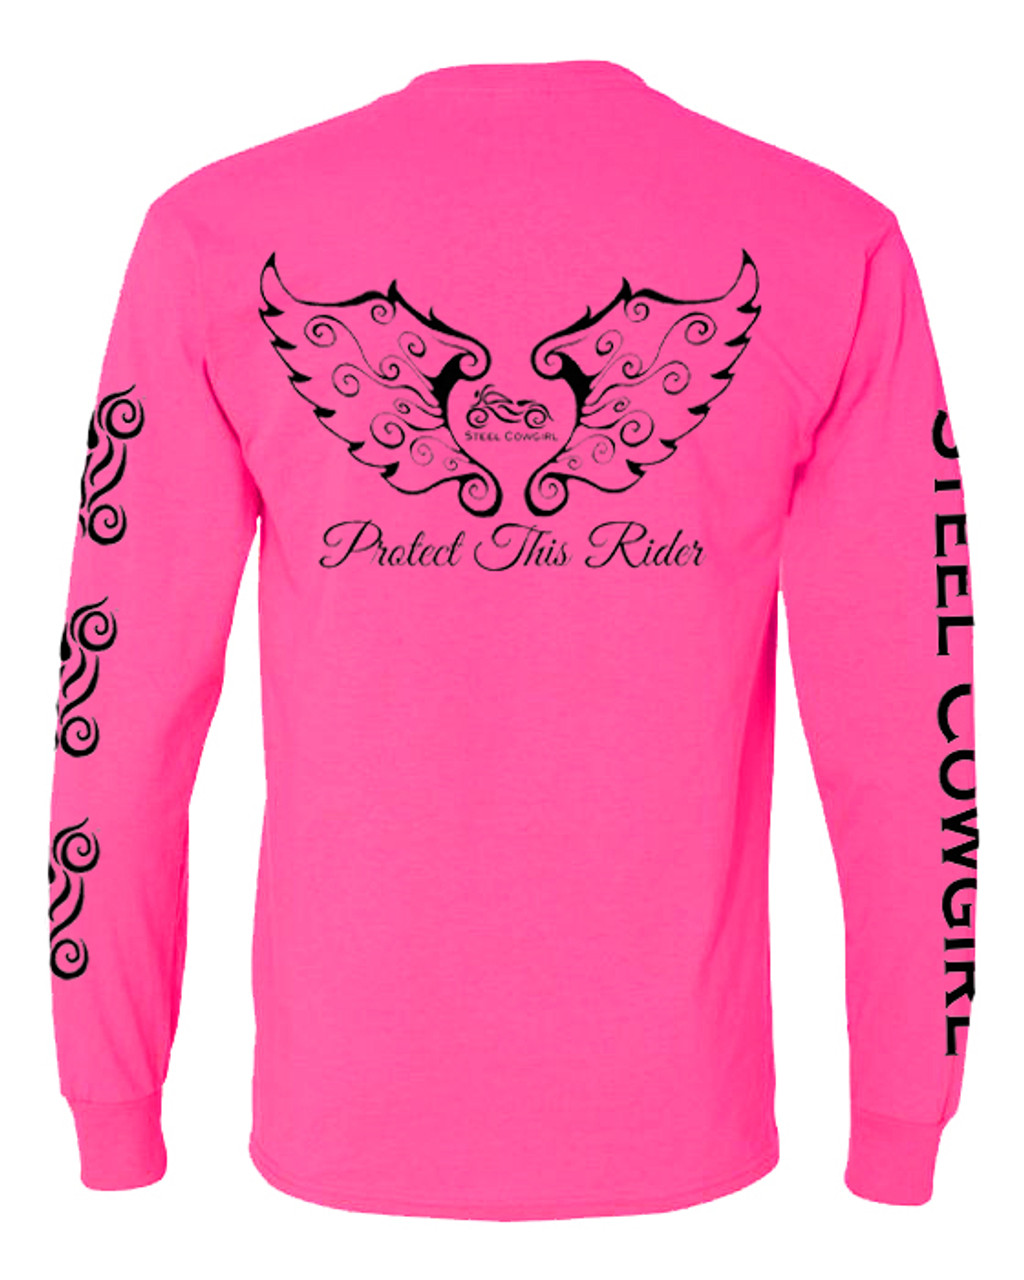 Protect This Rider Neon Pink Long Sleeve T-shirt